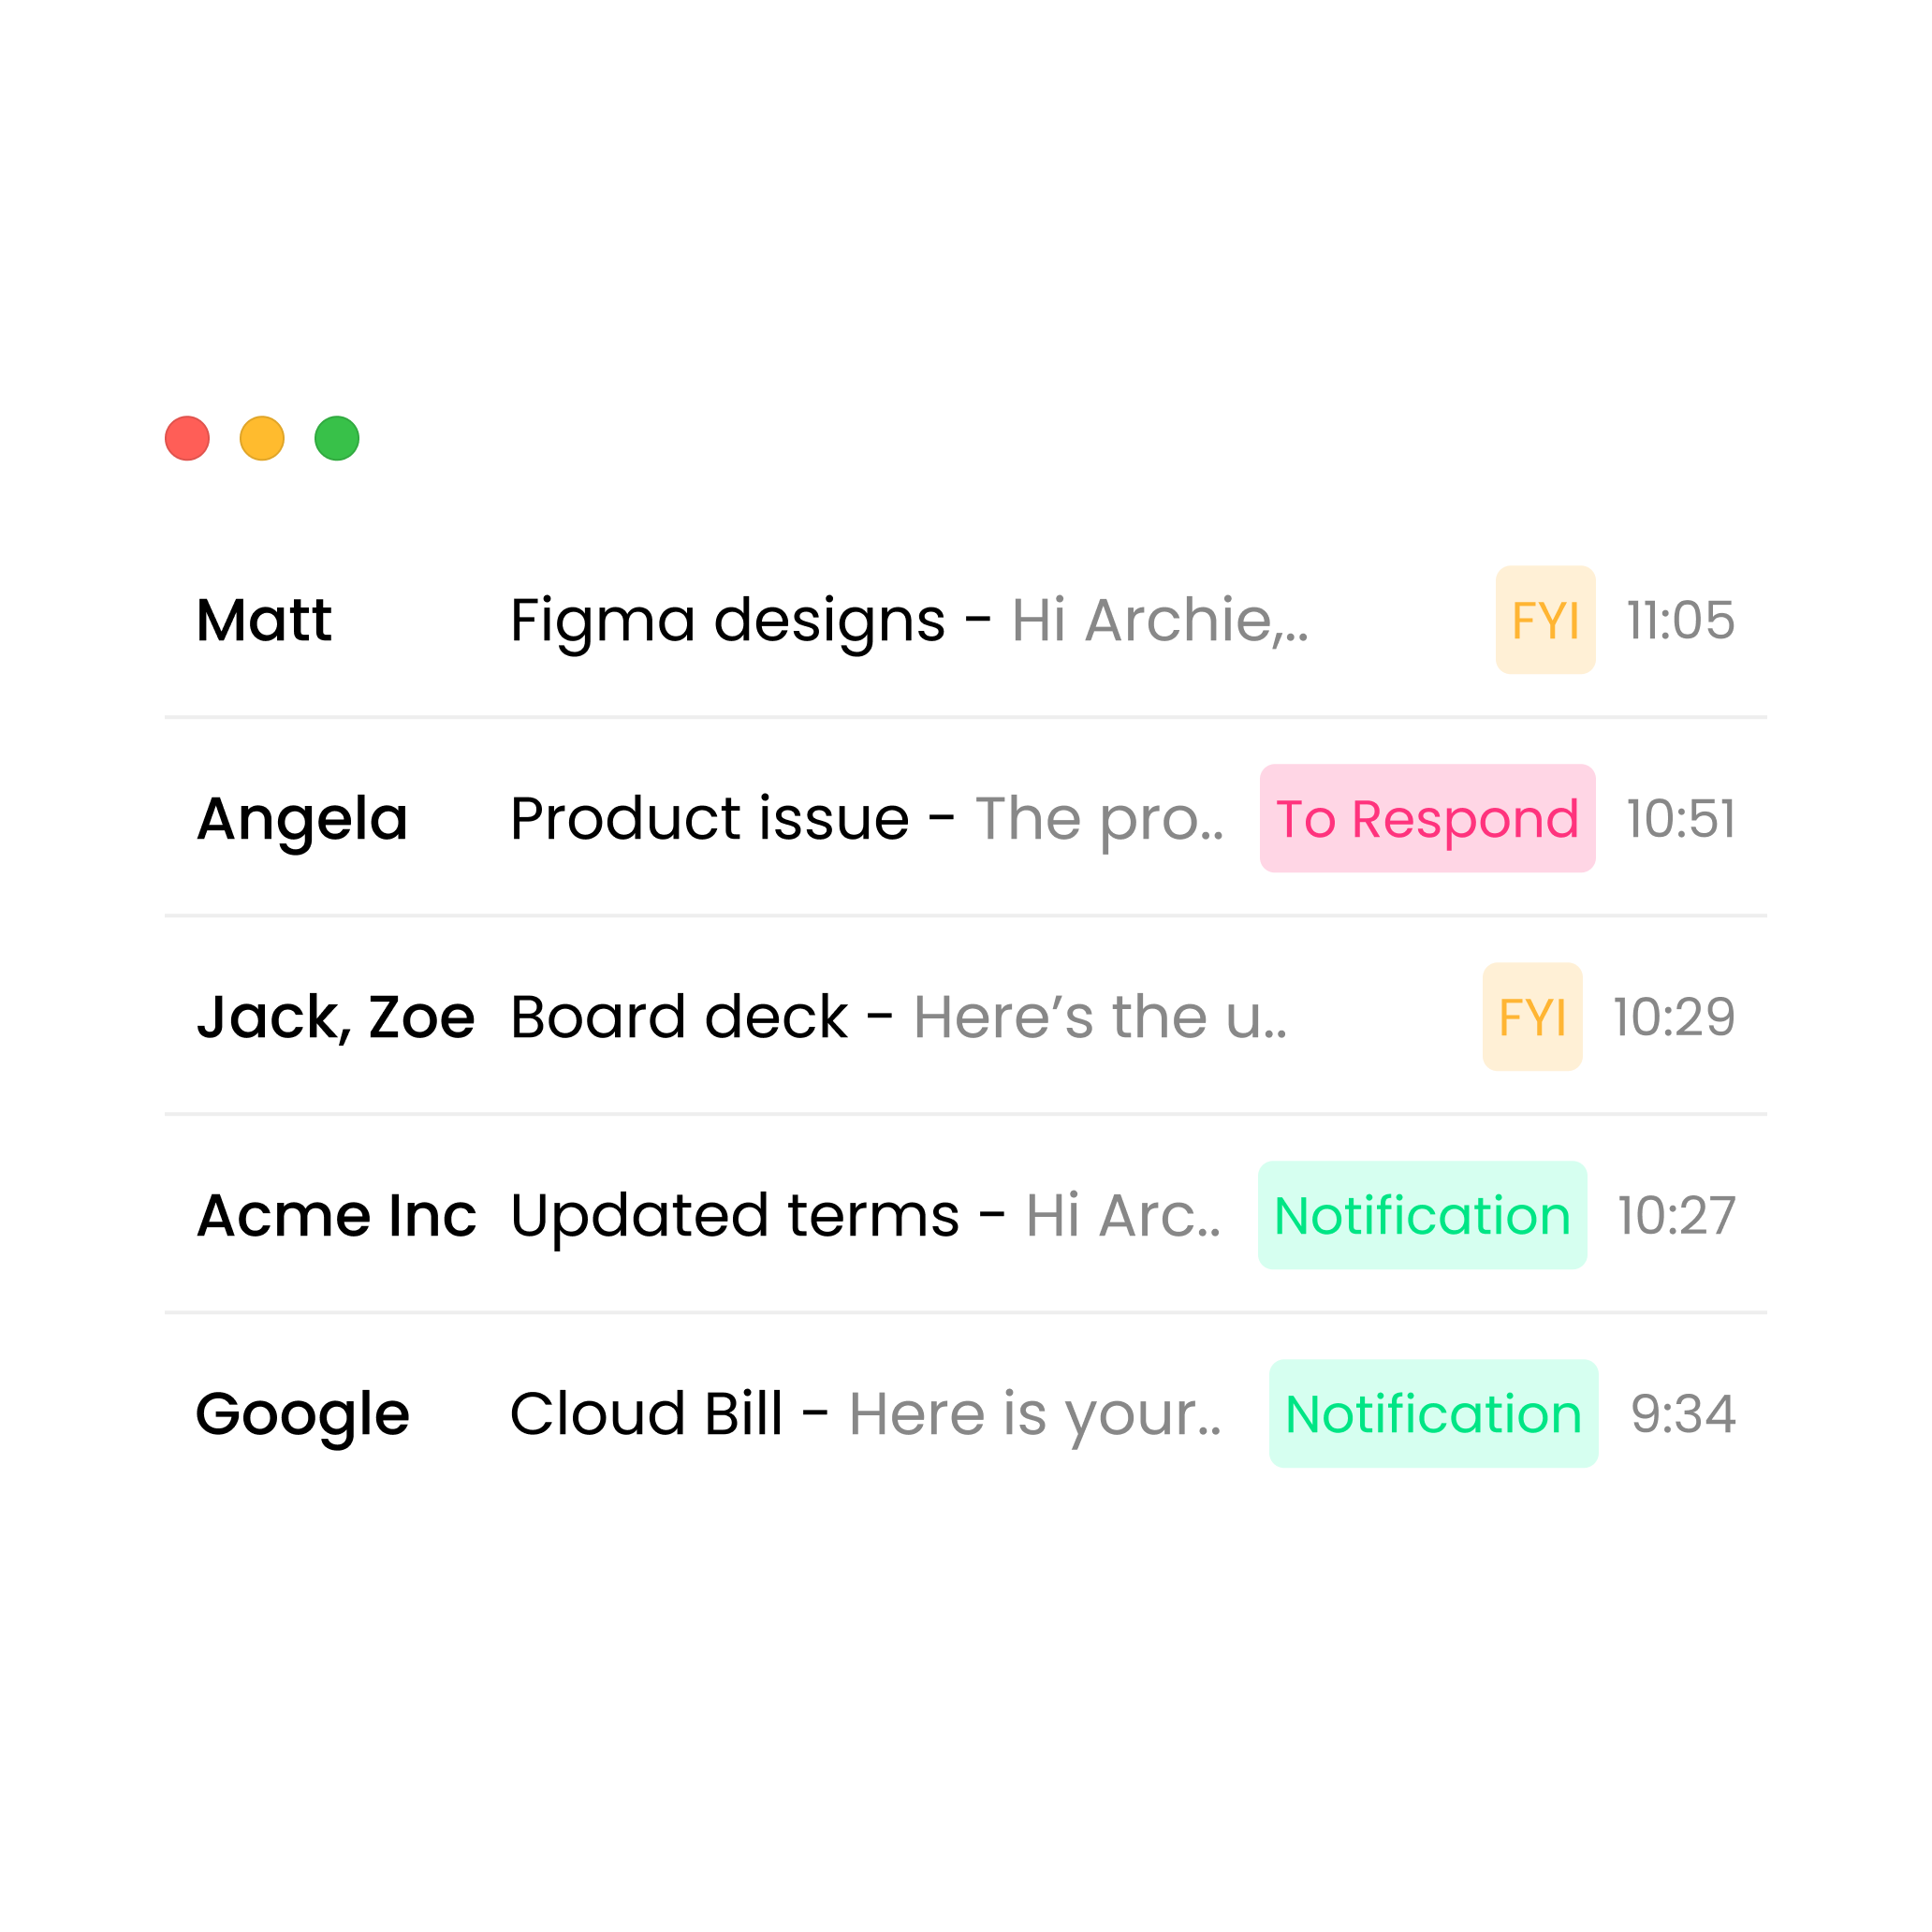 An image of an email inbox with emails triaged into the following categories: 'To respond', 'FYI' and 'Notification'.